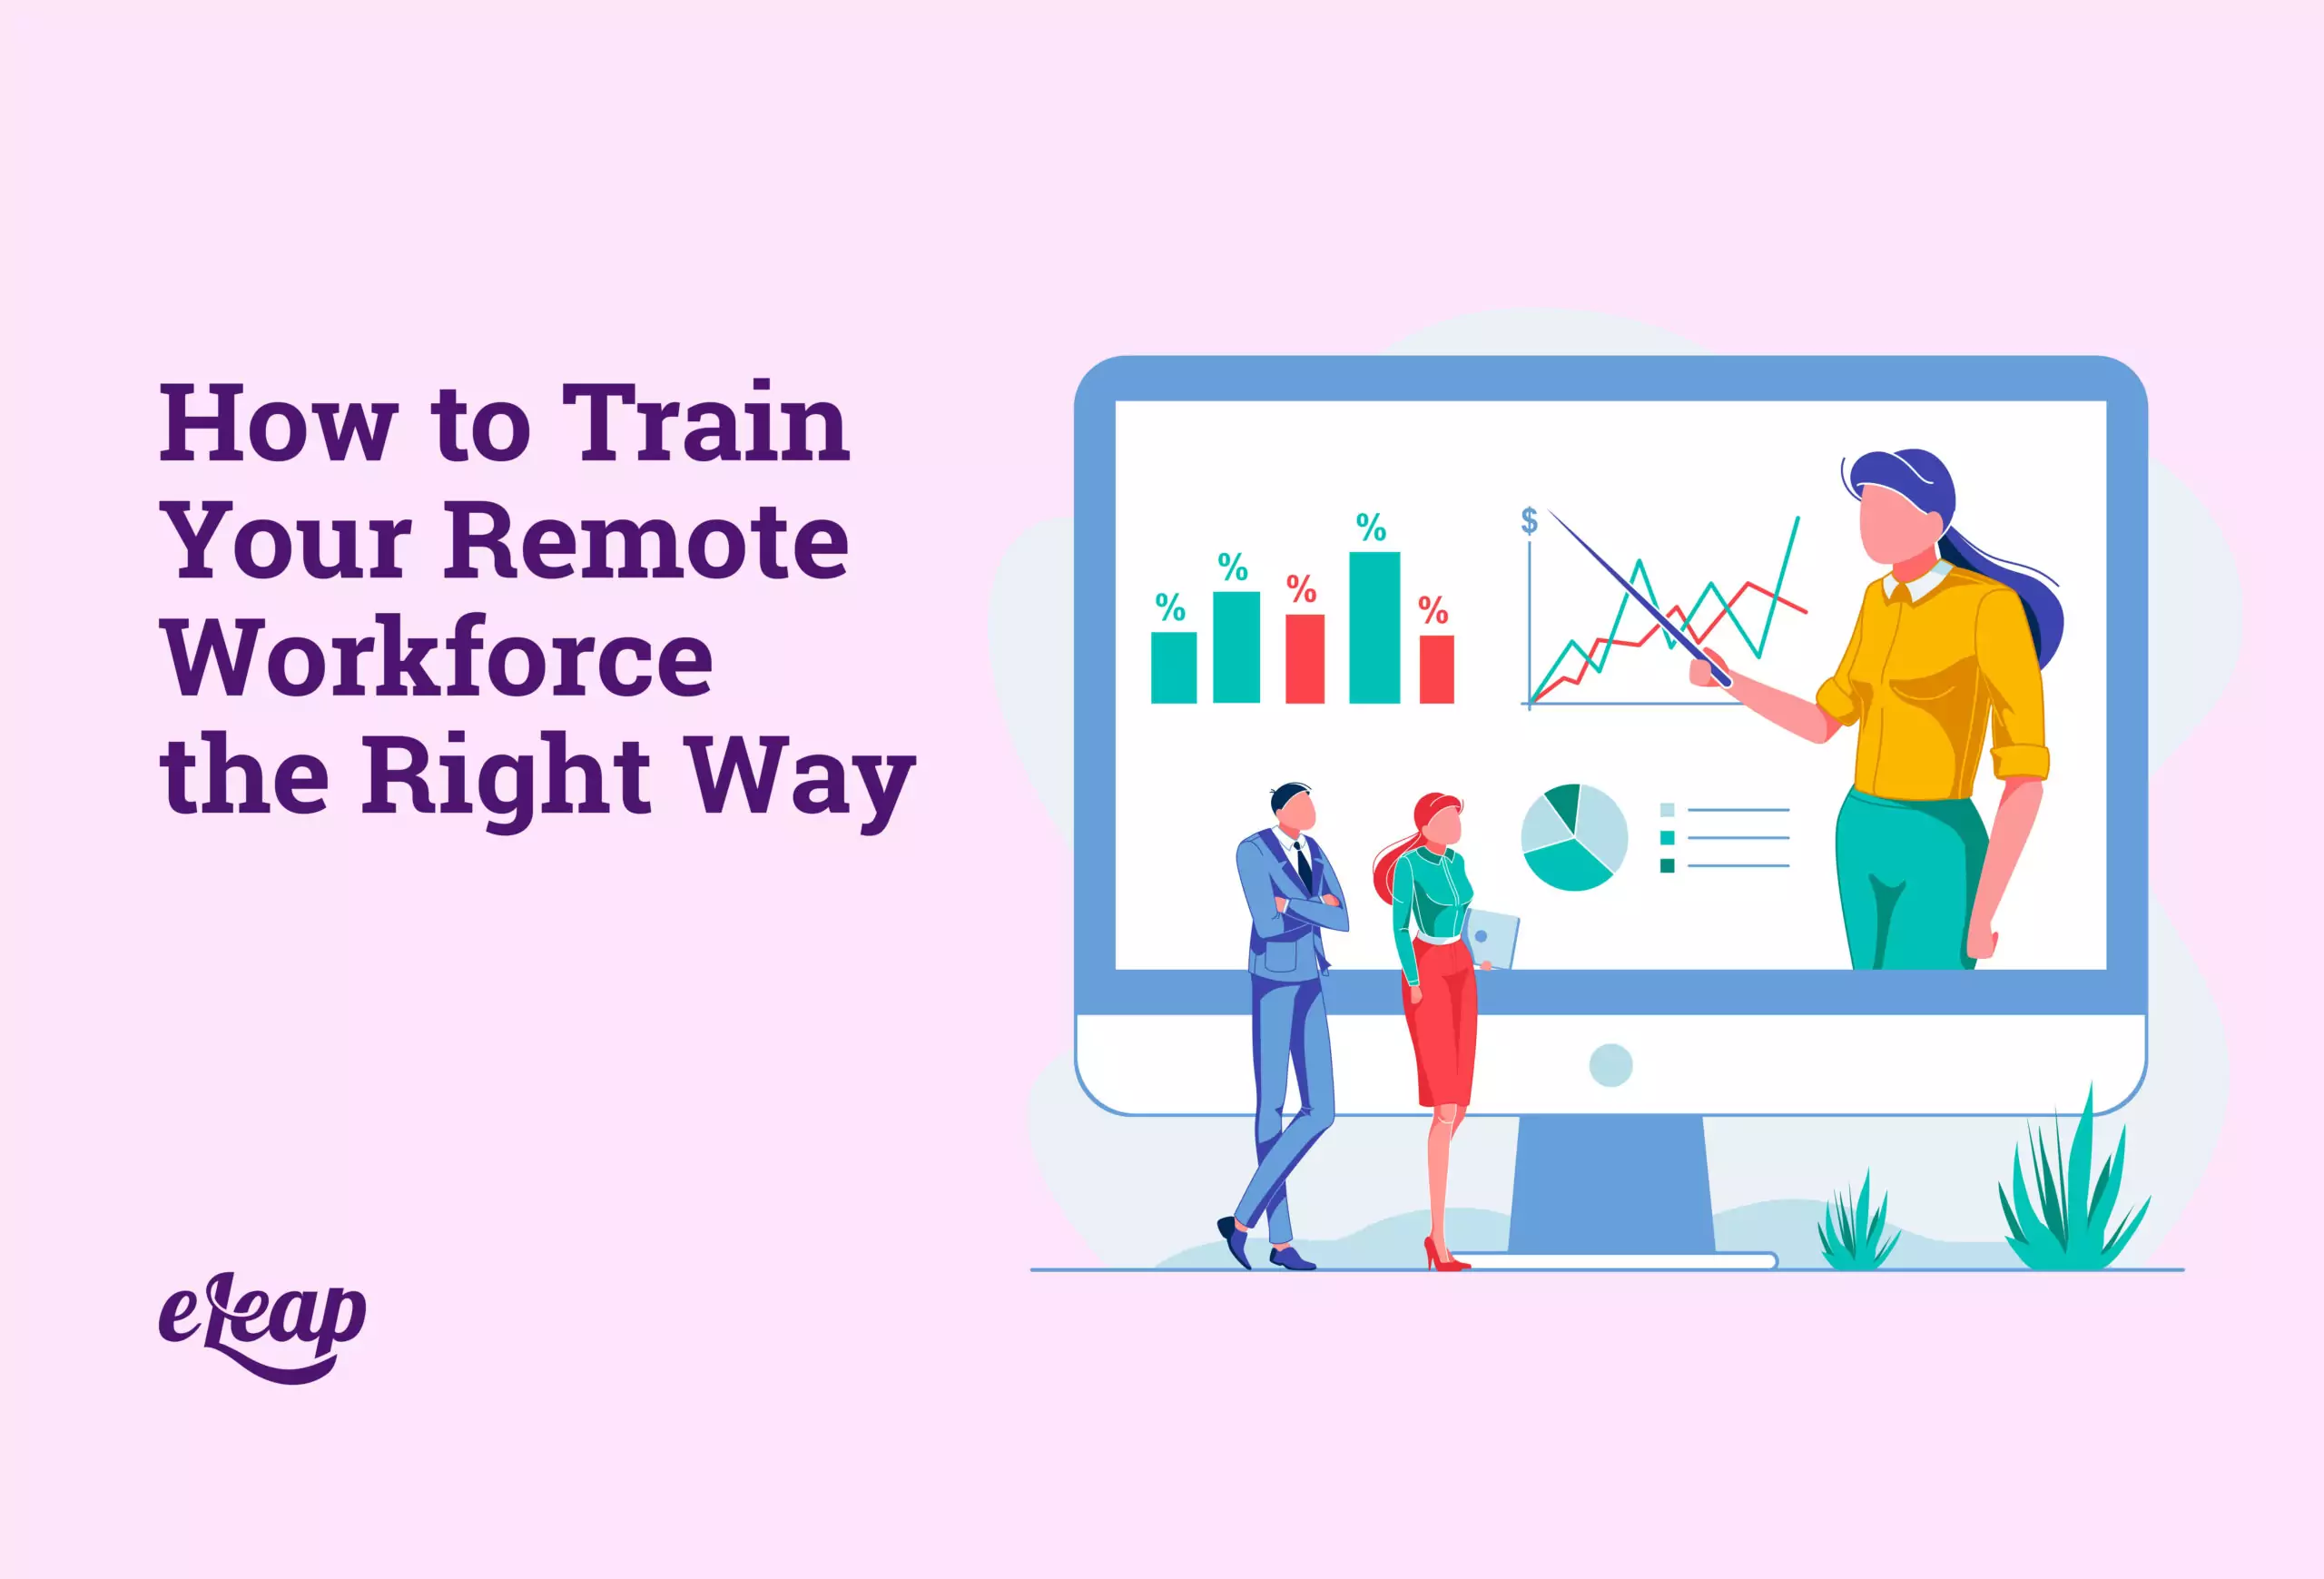 How to Train Your Remote Workforce the Right Way